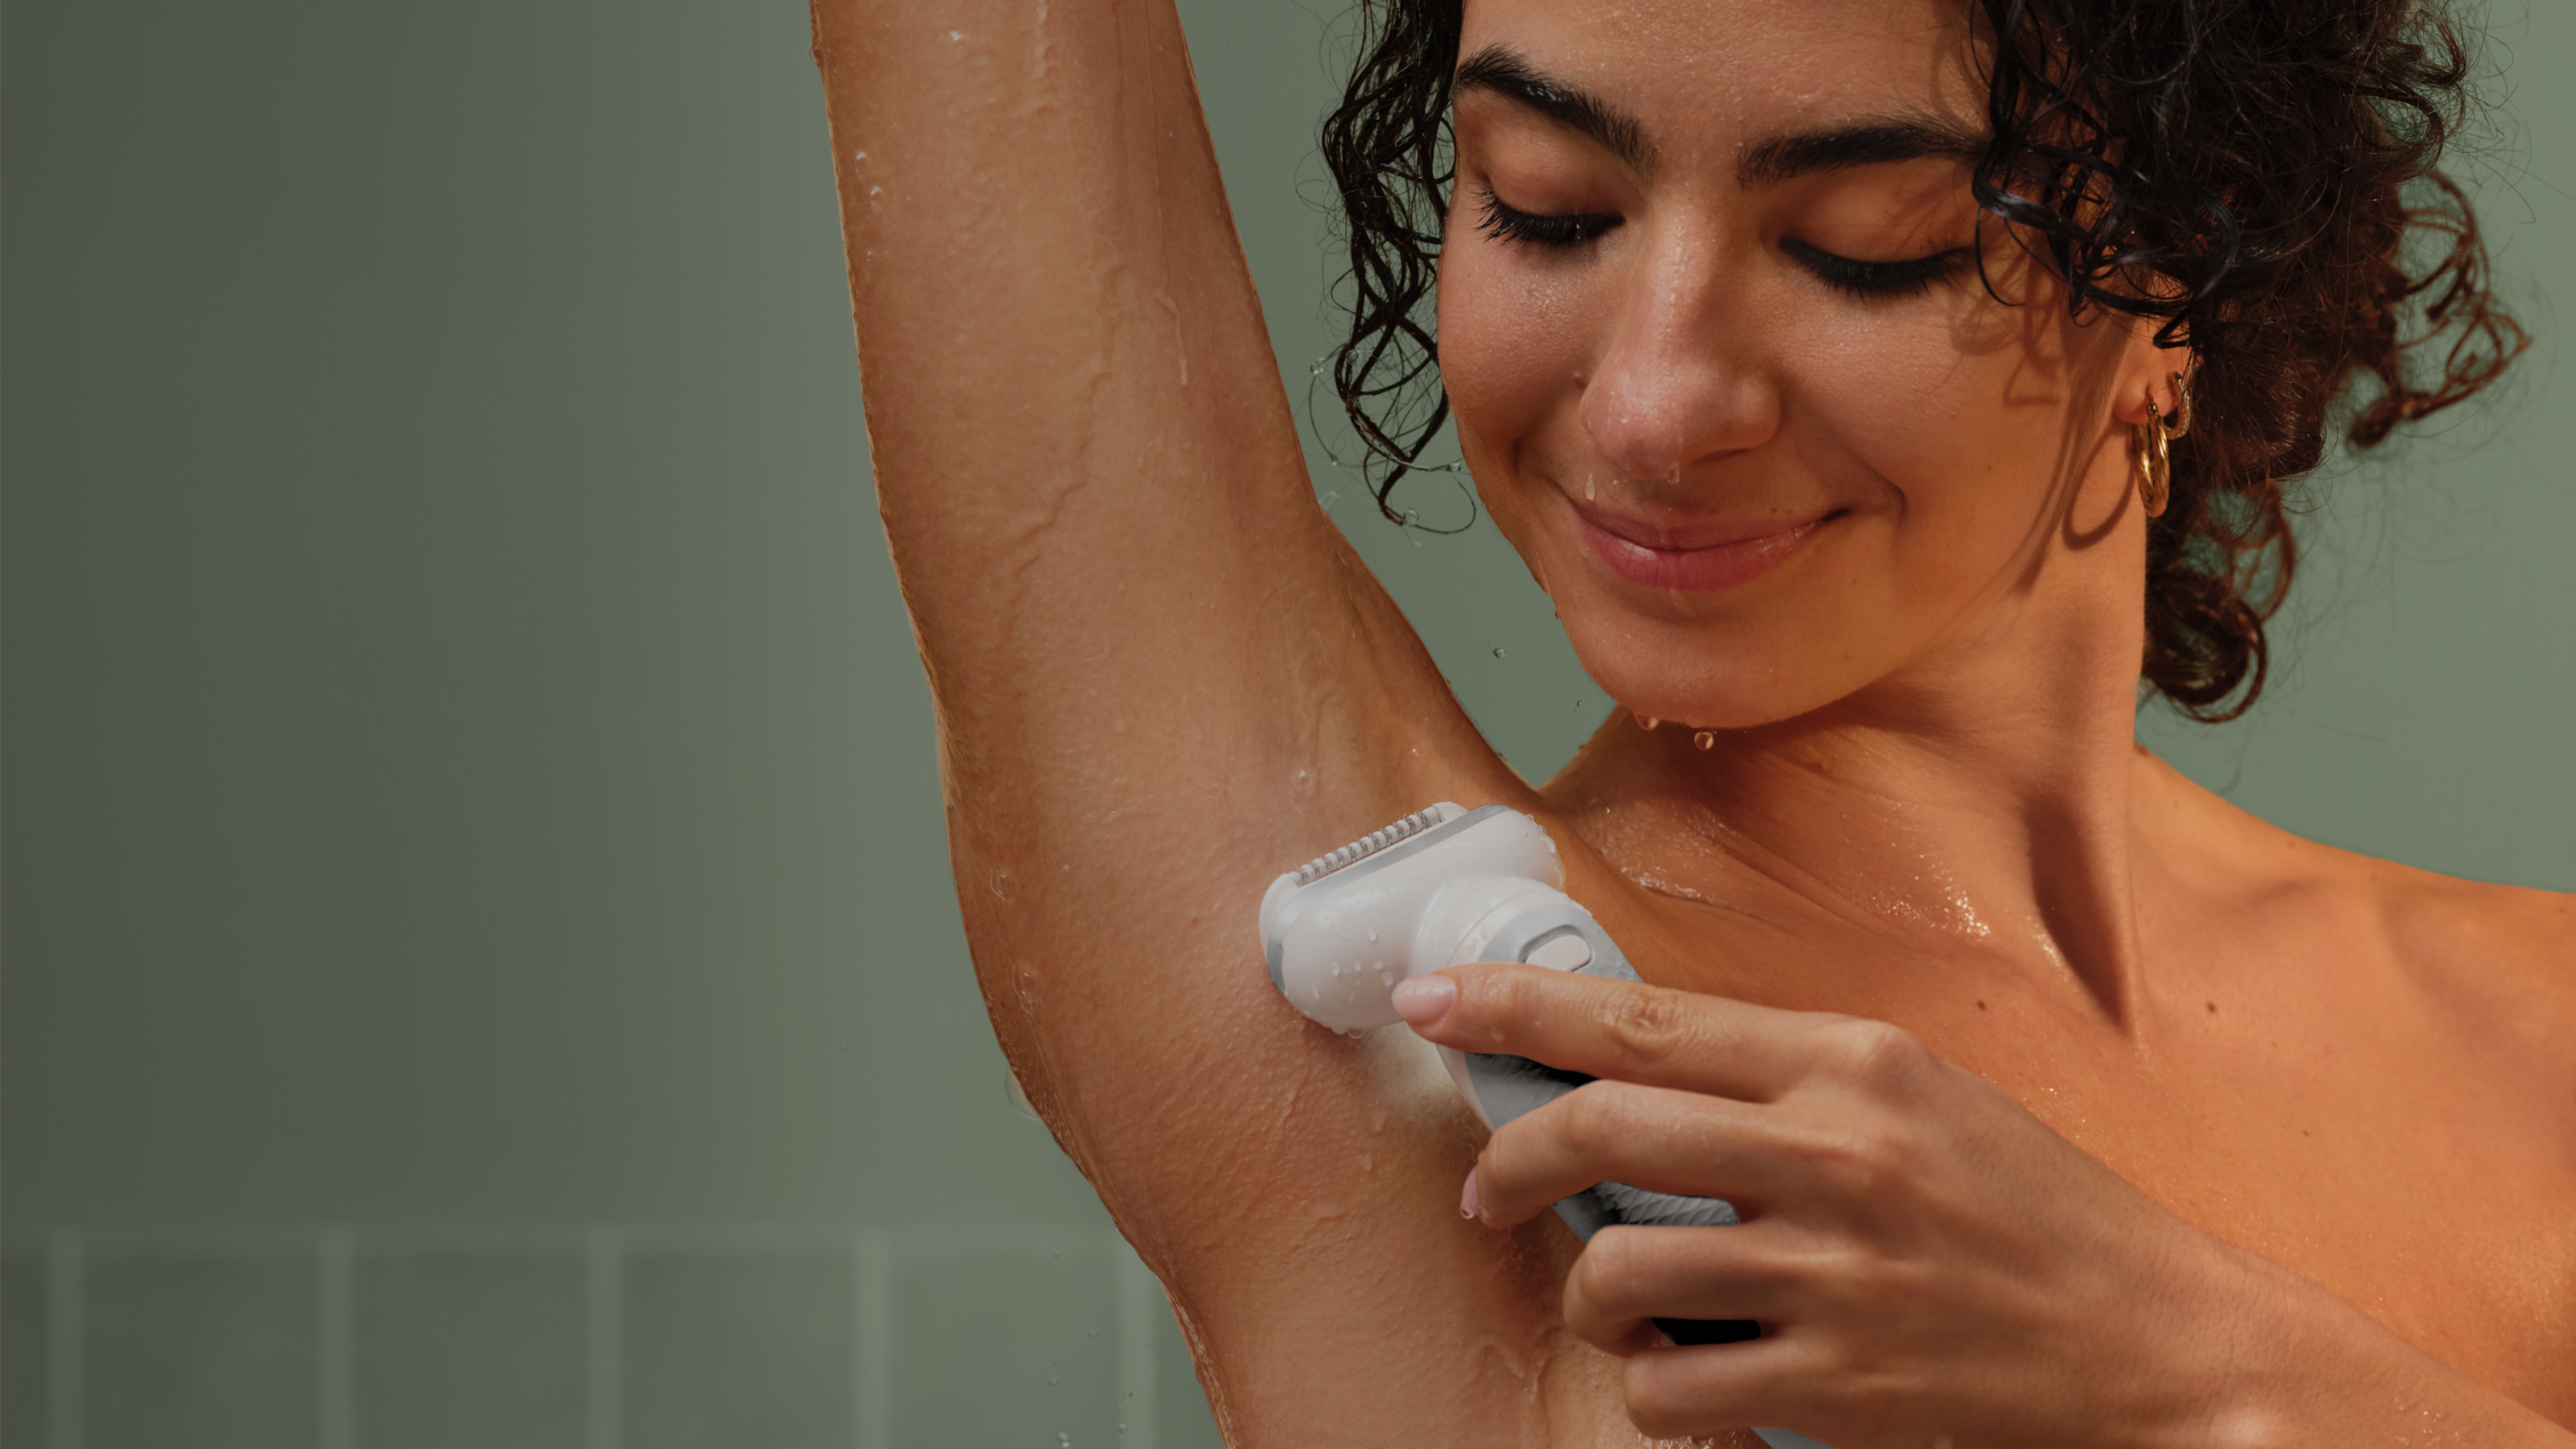 Woman using the epilator underarm with water running down her arm.